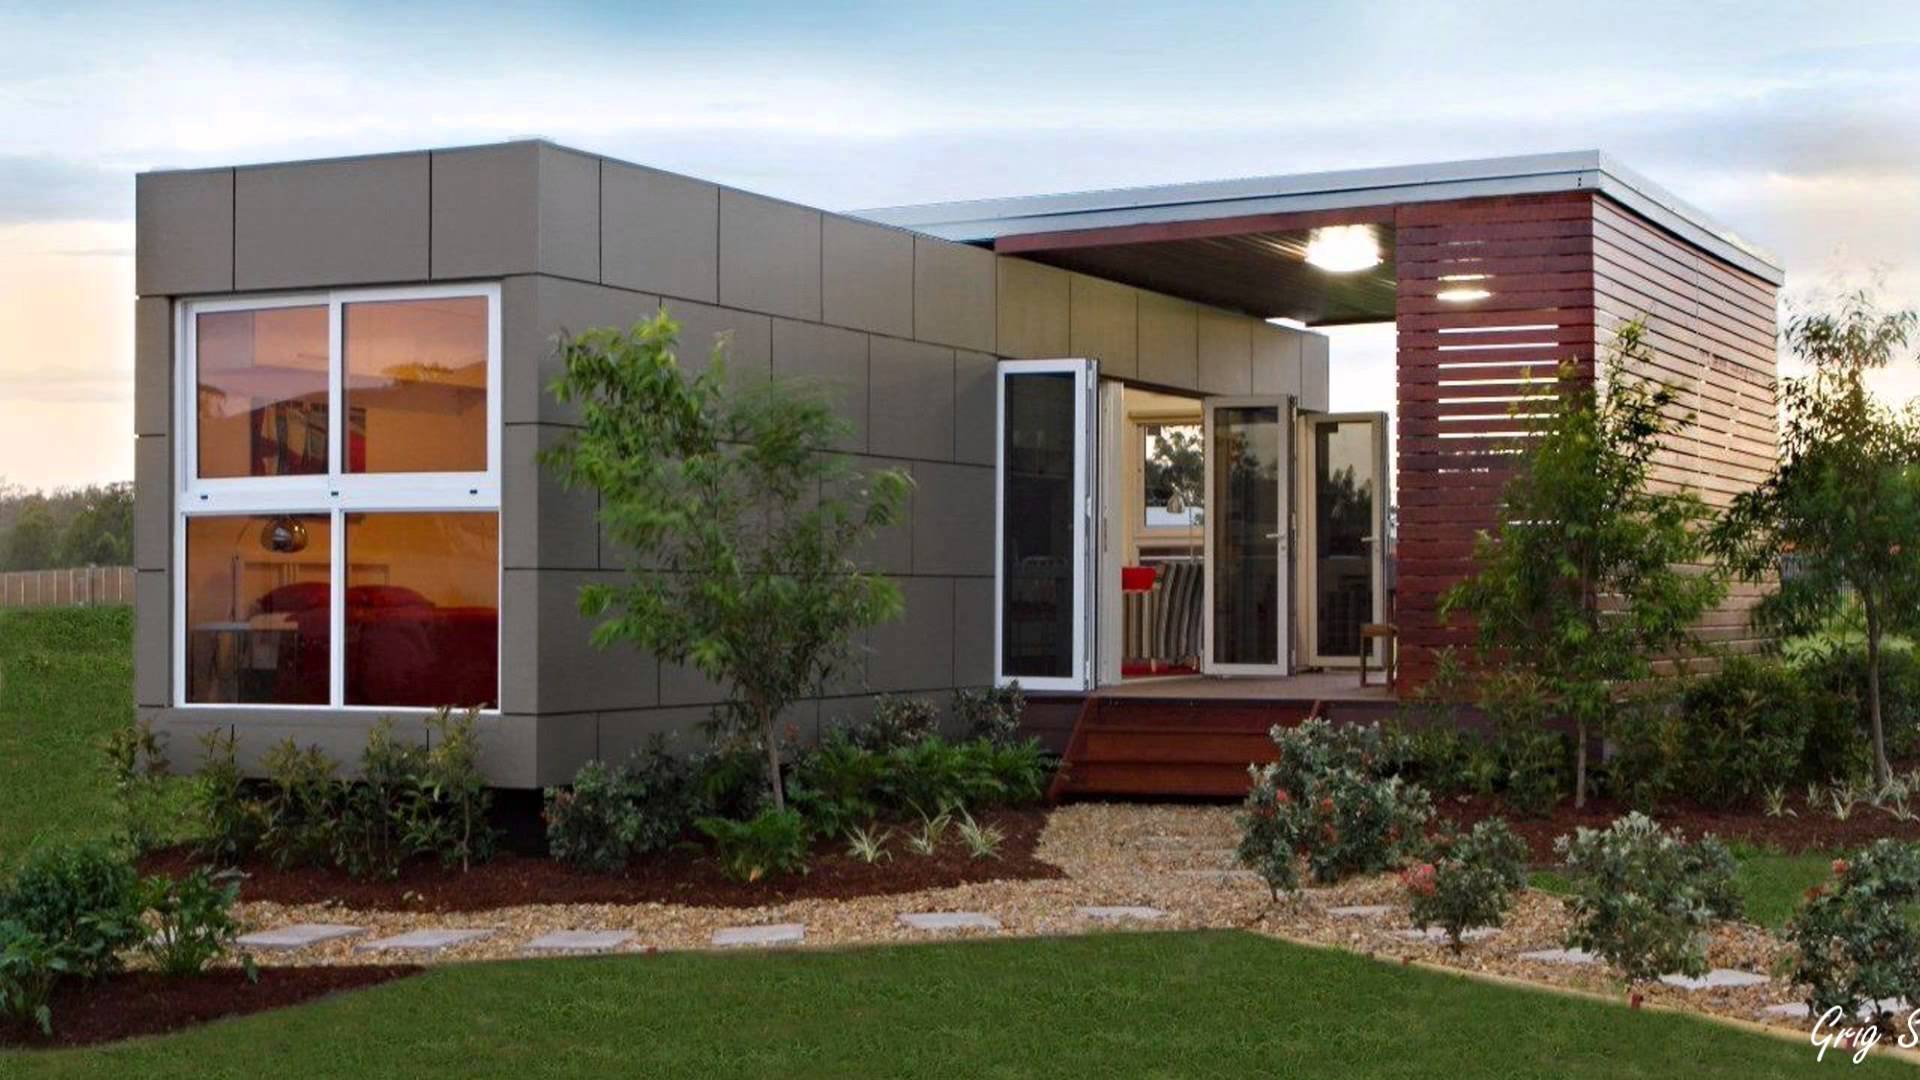 container house design awesome shipping container home designs (2) - youtube CQFPHQD